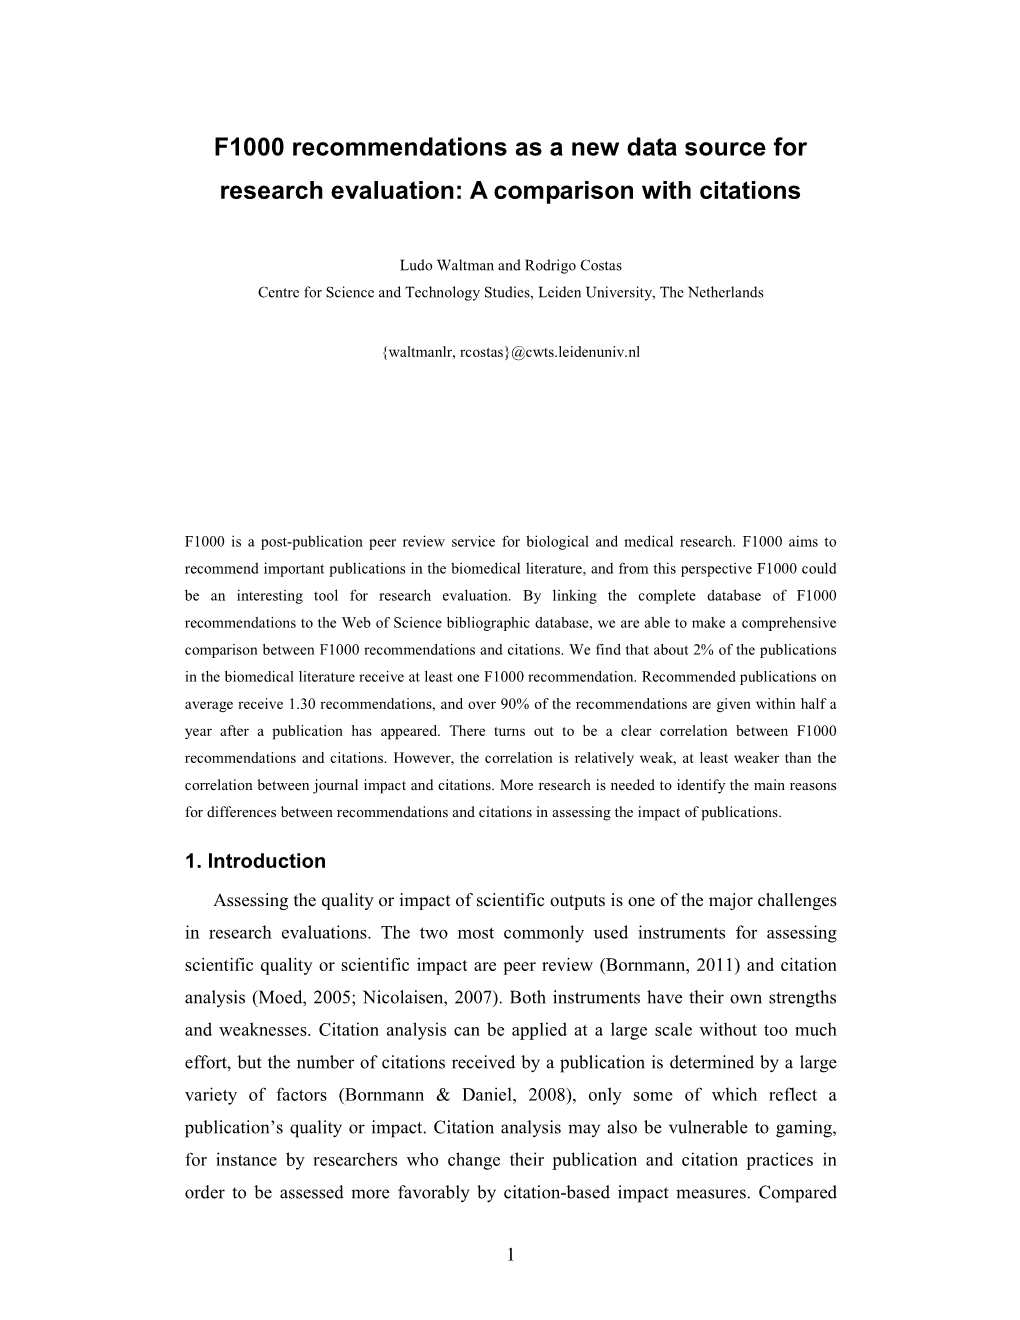 F1000 Recommendations As a New Data Source for Research Evaluation: a Comparison with Citations